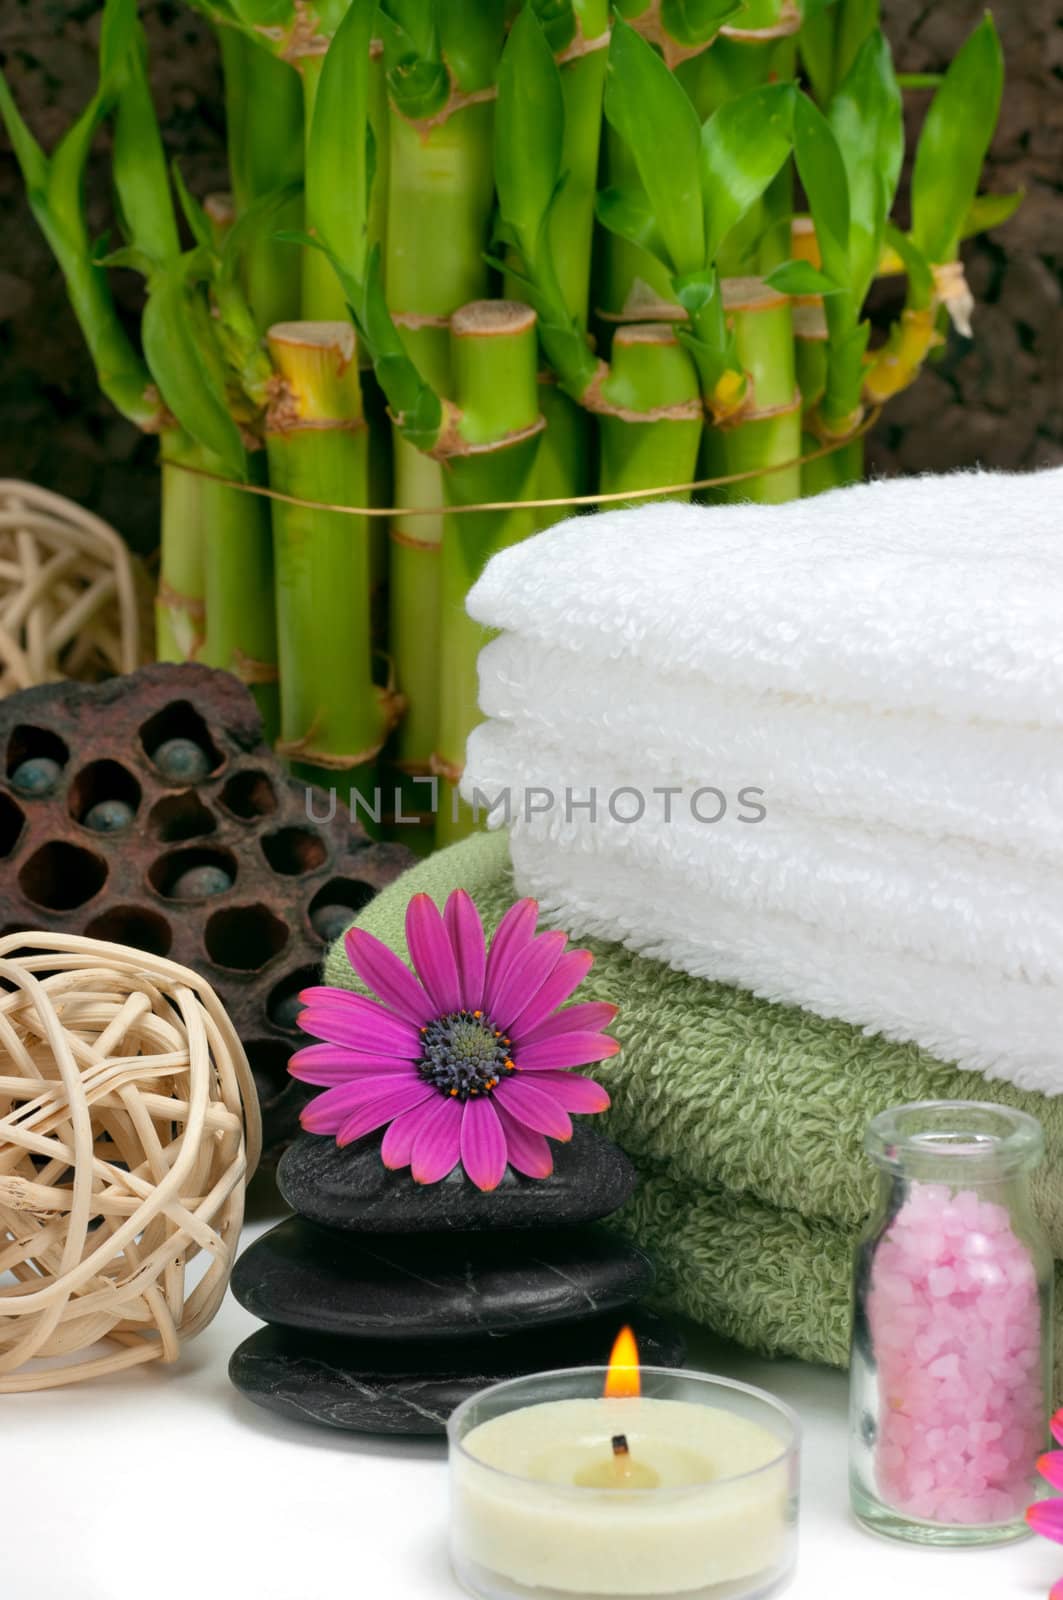 Spa scene with bamboo, towels, aromatic candles, bath salt, pebbles and daisies